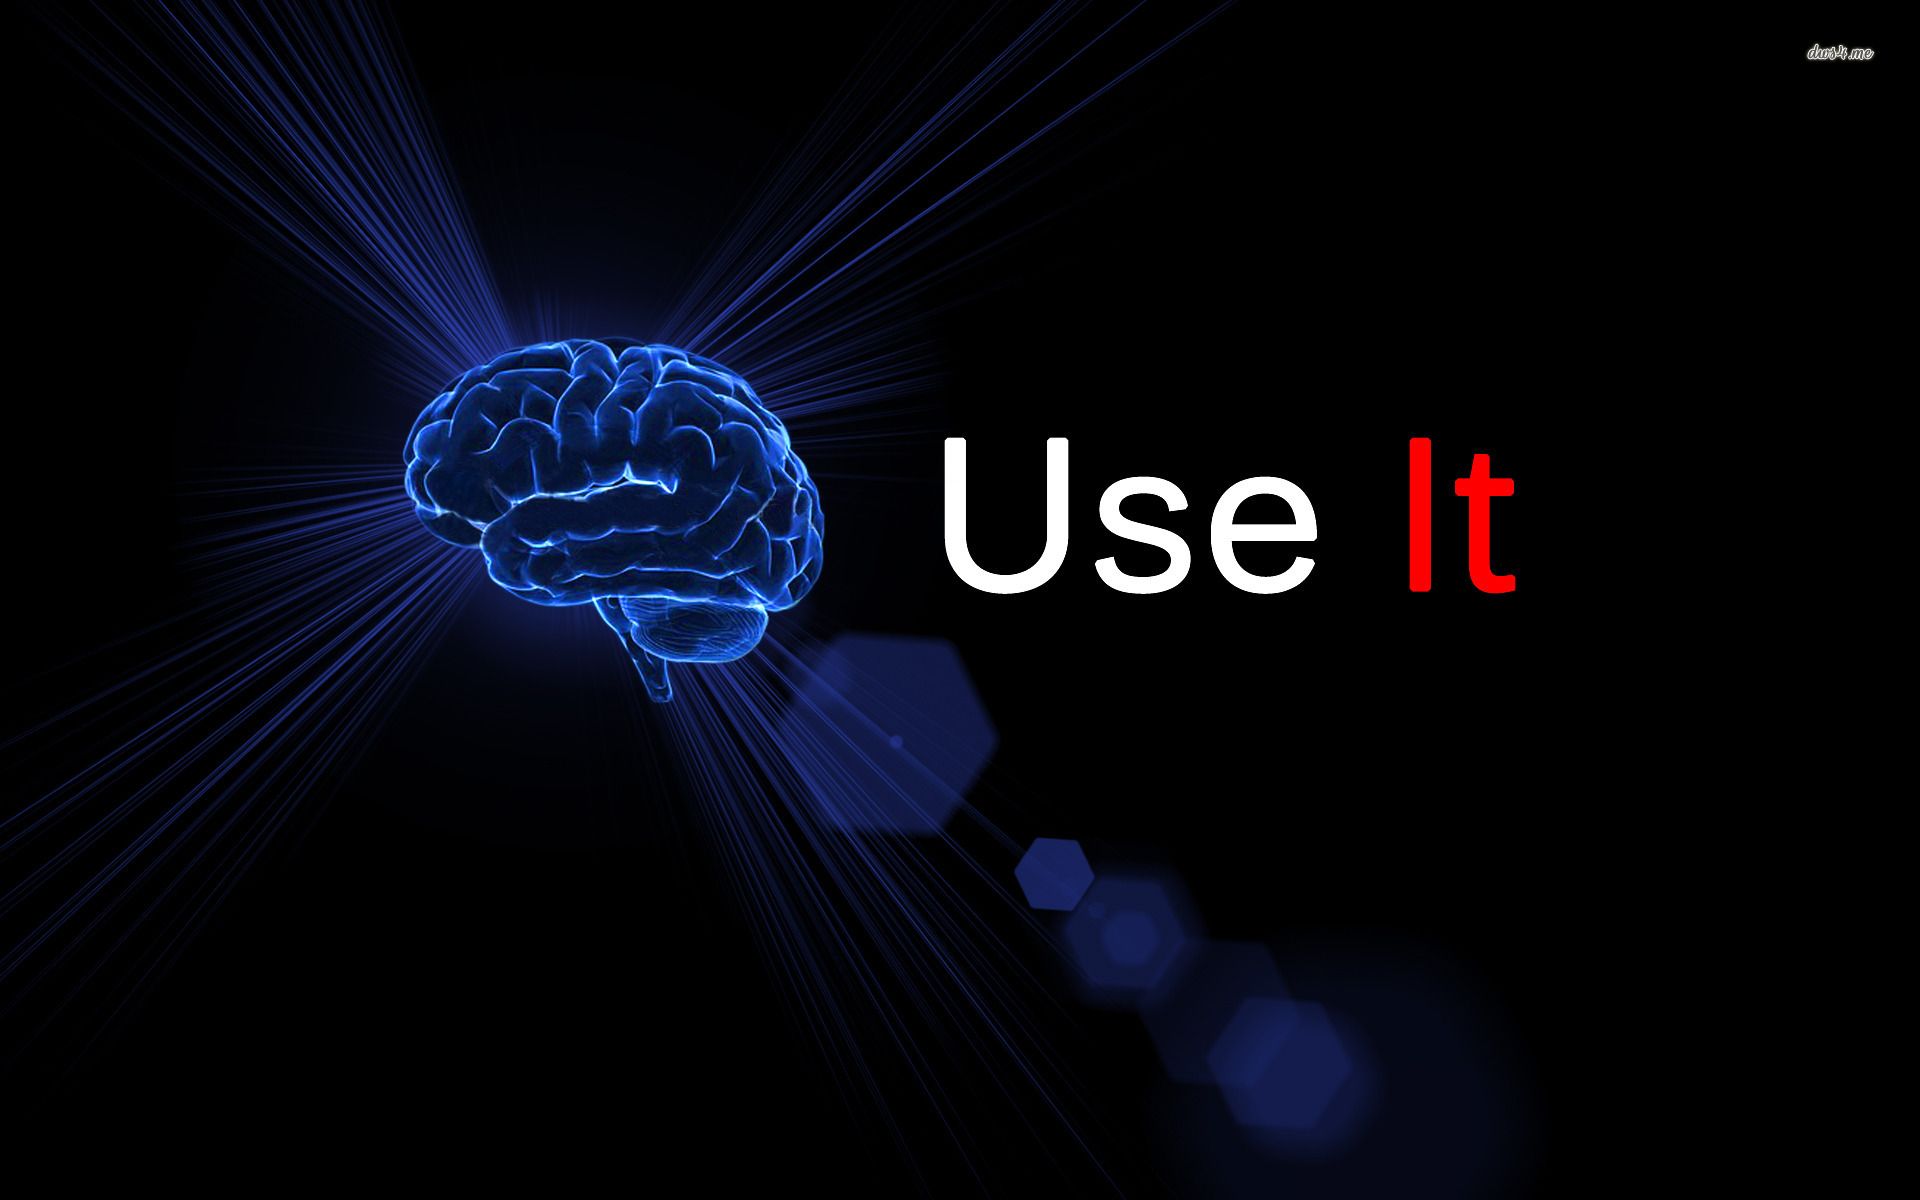 Use your brain wallpaper - Typography wallpapers - #19789